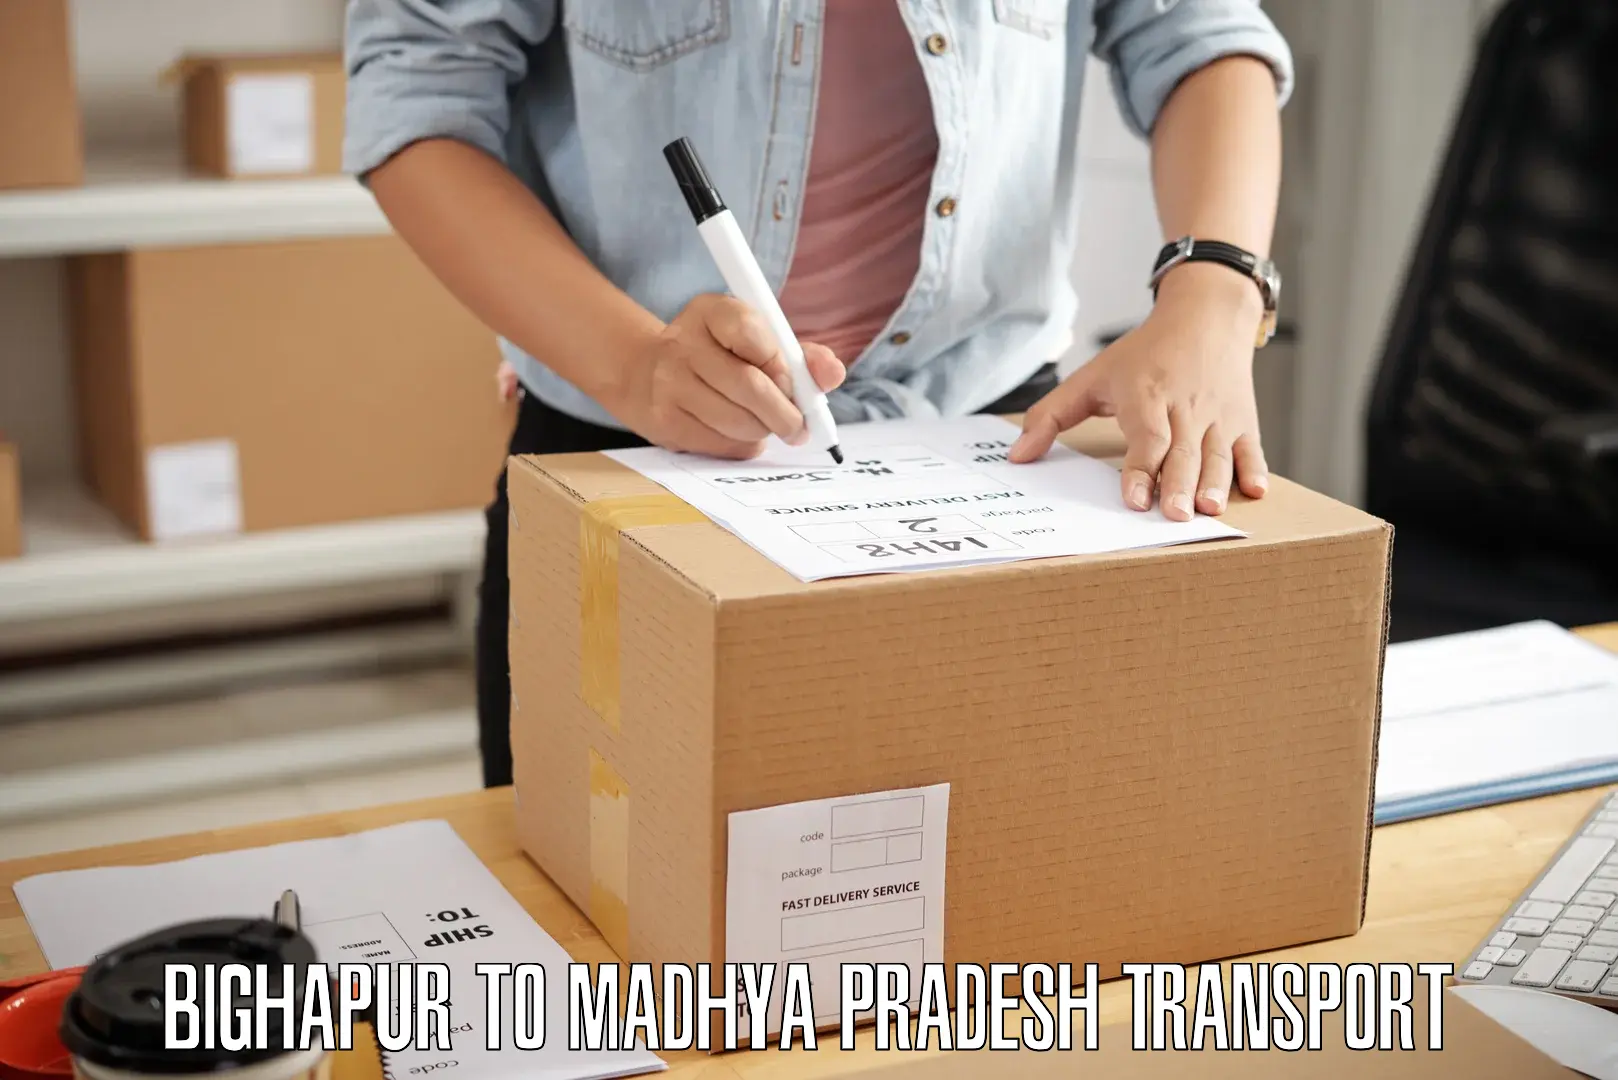 Air freight transport services in Bighapur to Shajapur